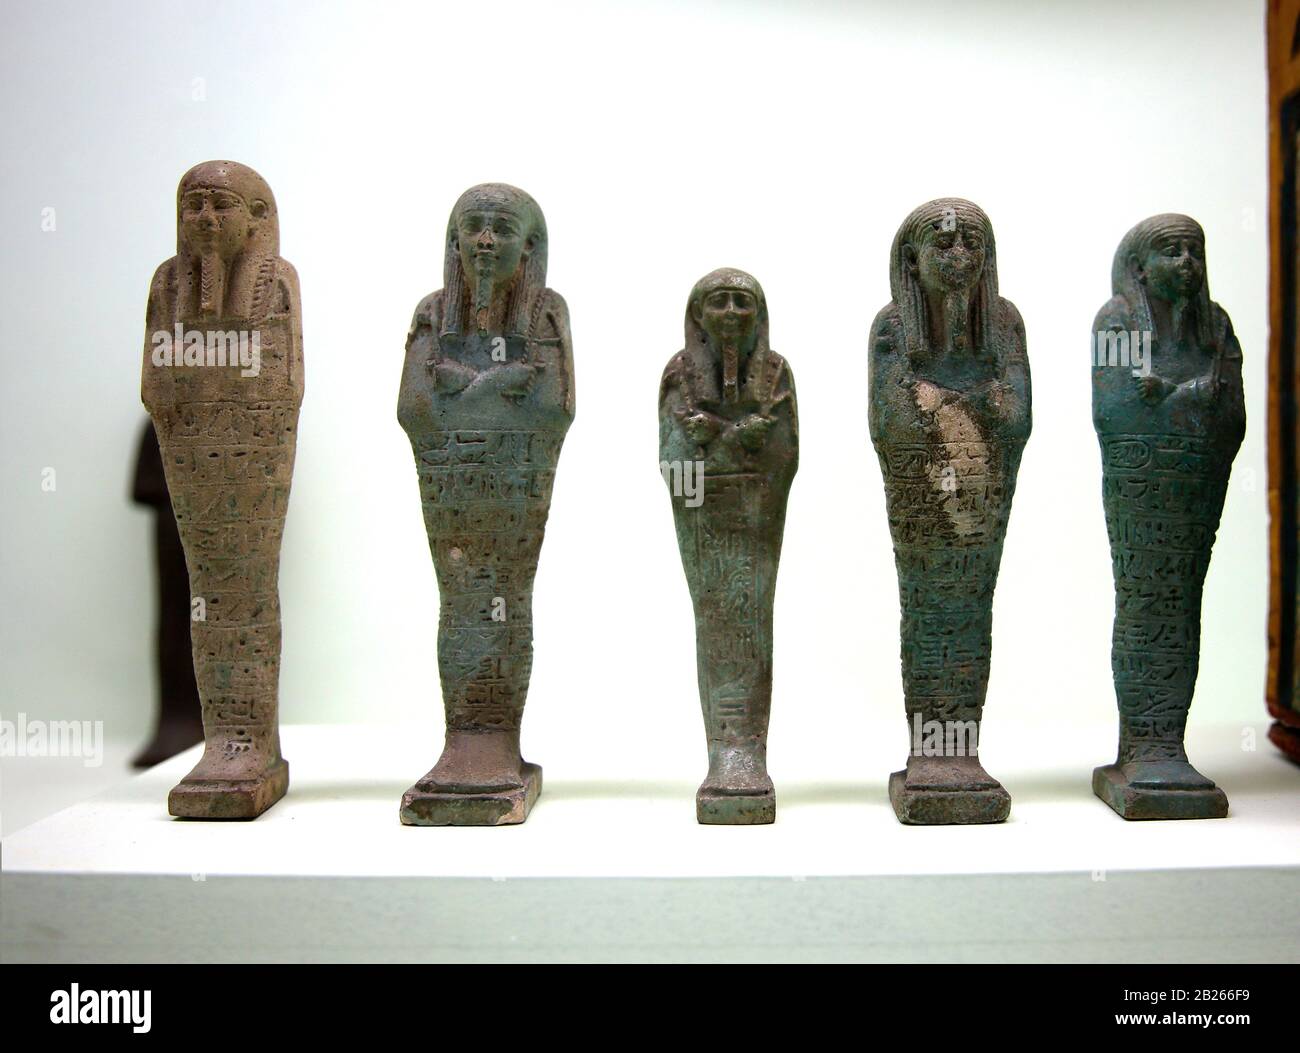 Egypt. Ushabti. (also called shabti). Funerary figurine, placed in tombs. Istanbul Archaeological Museum, Turkey. Stock Photo